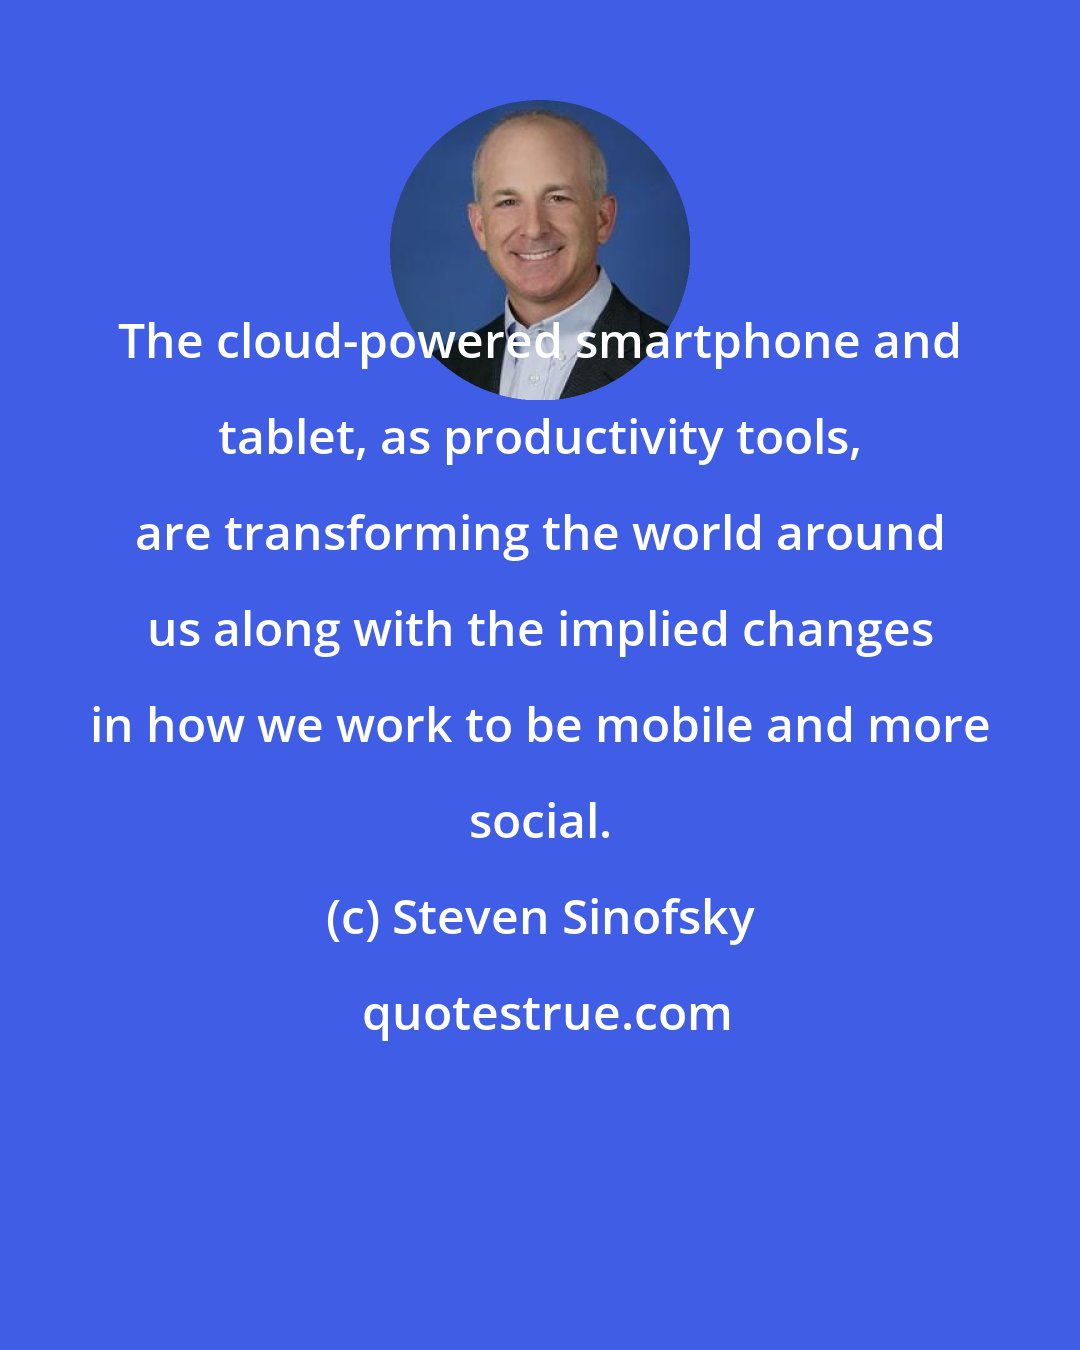 Steven Sinofsky: The cloud-powered smartphone and tablet, as productivity tools, are transforming the world around us along with the implied changes in how we work to be mobile and more social.